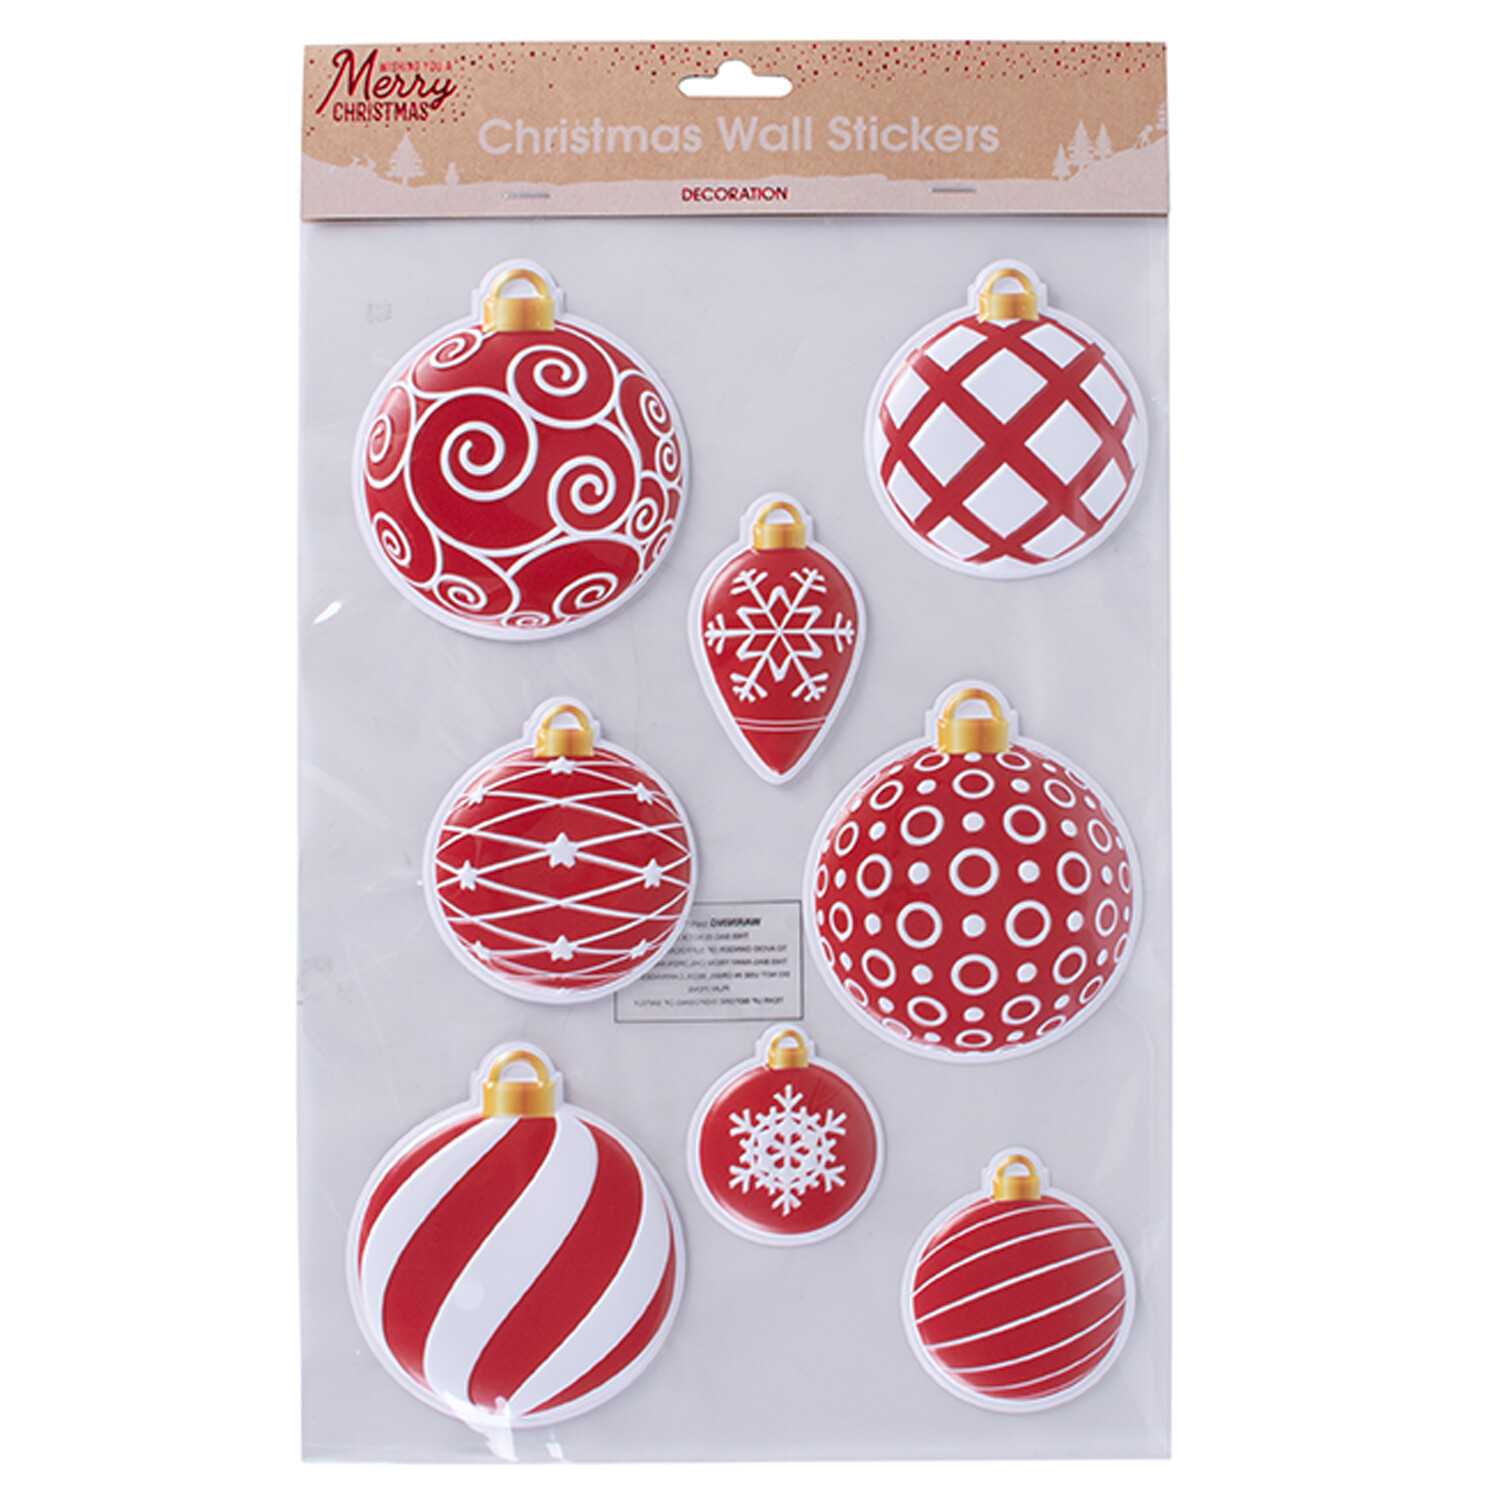 Pack of Christmas Wall Stickers Image 3